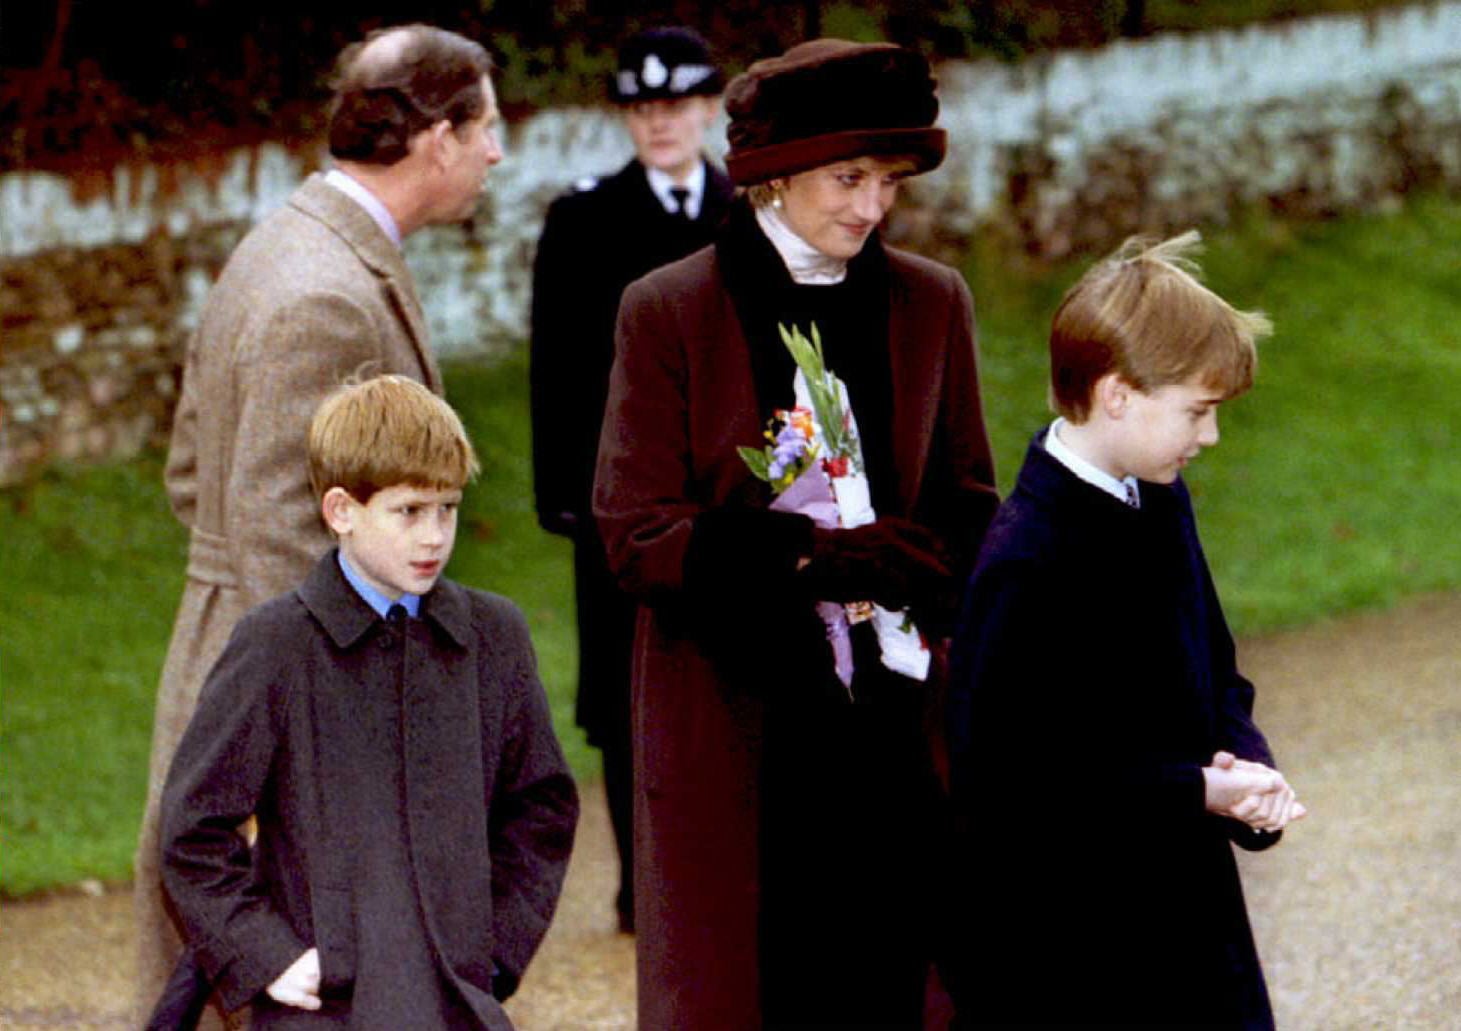 Earl Spencer has kept to his word to support the two princes as he promised at their mother’s funeral in 1997 and to always defend her ‘blood family’